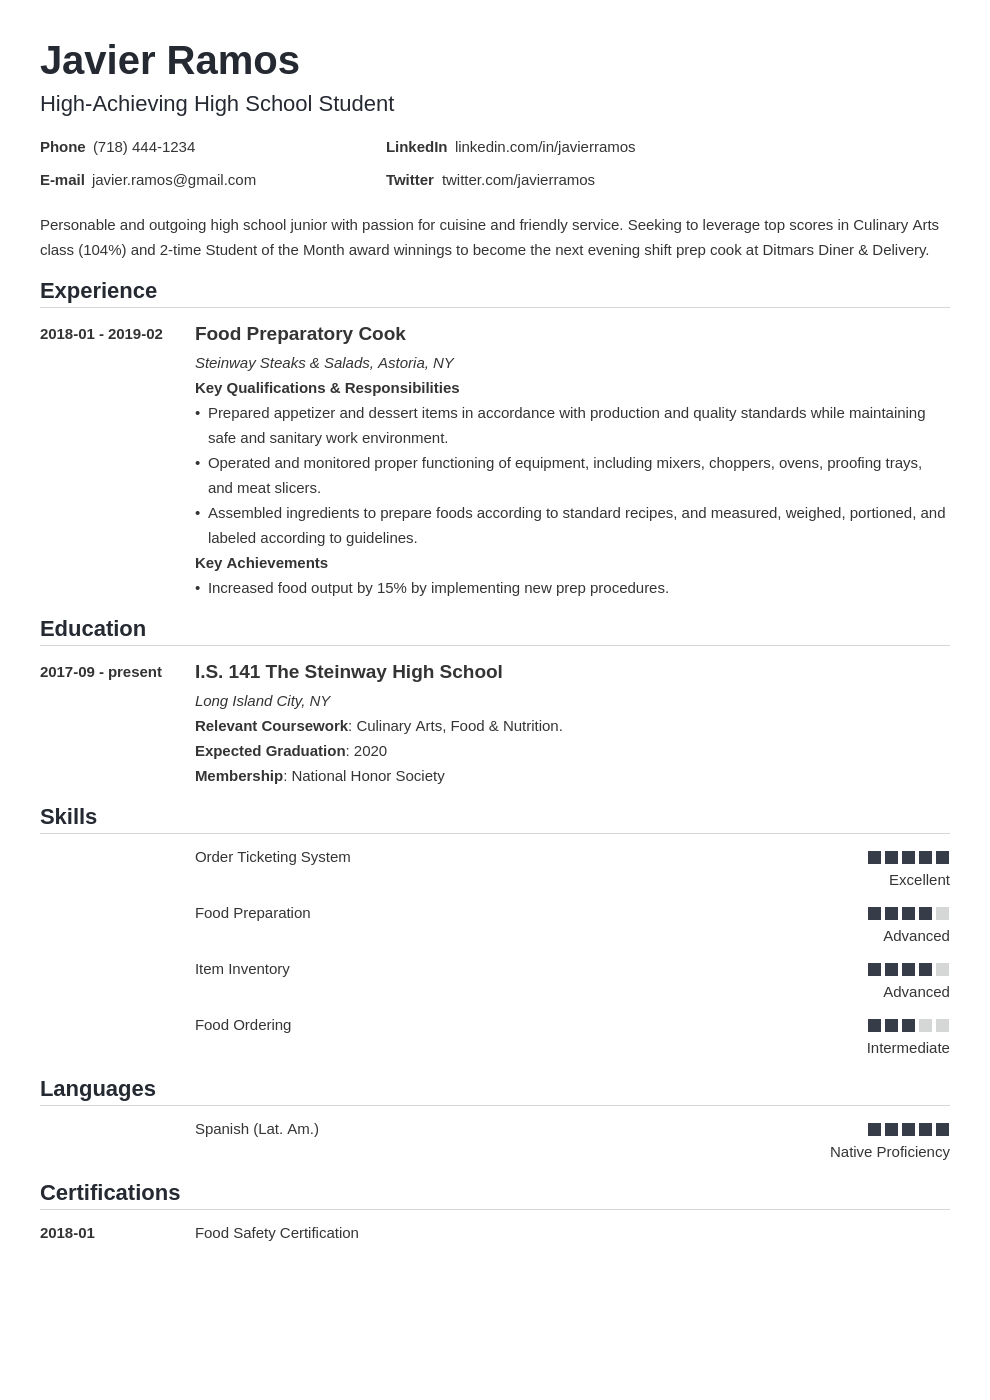 Resume writing for high school students questions